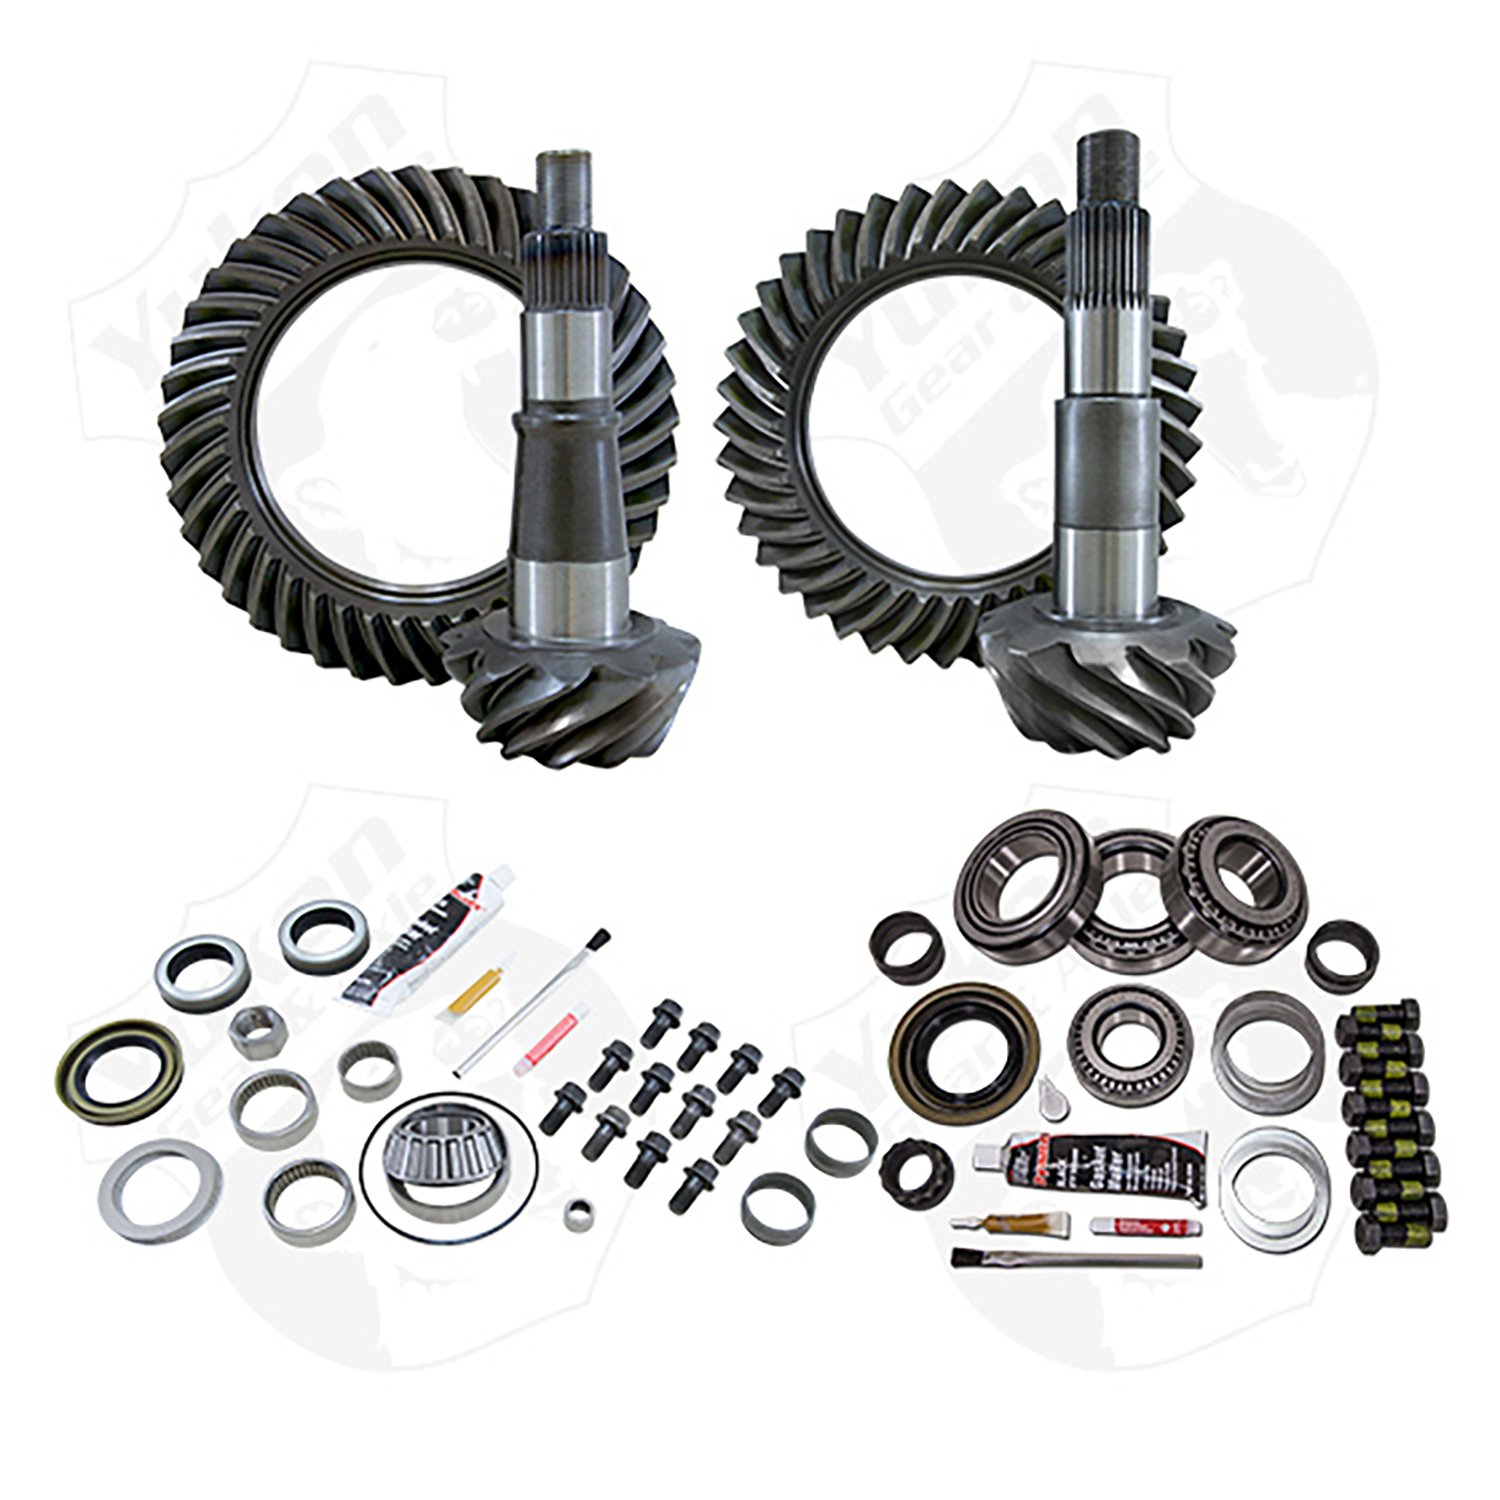 Gear & Install Kit Package For 2003-2011 Ram 2500 And 3500, 4.56 Ratio